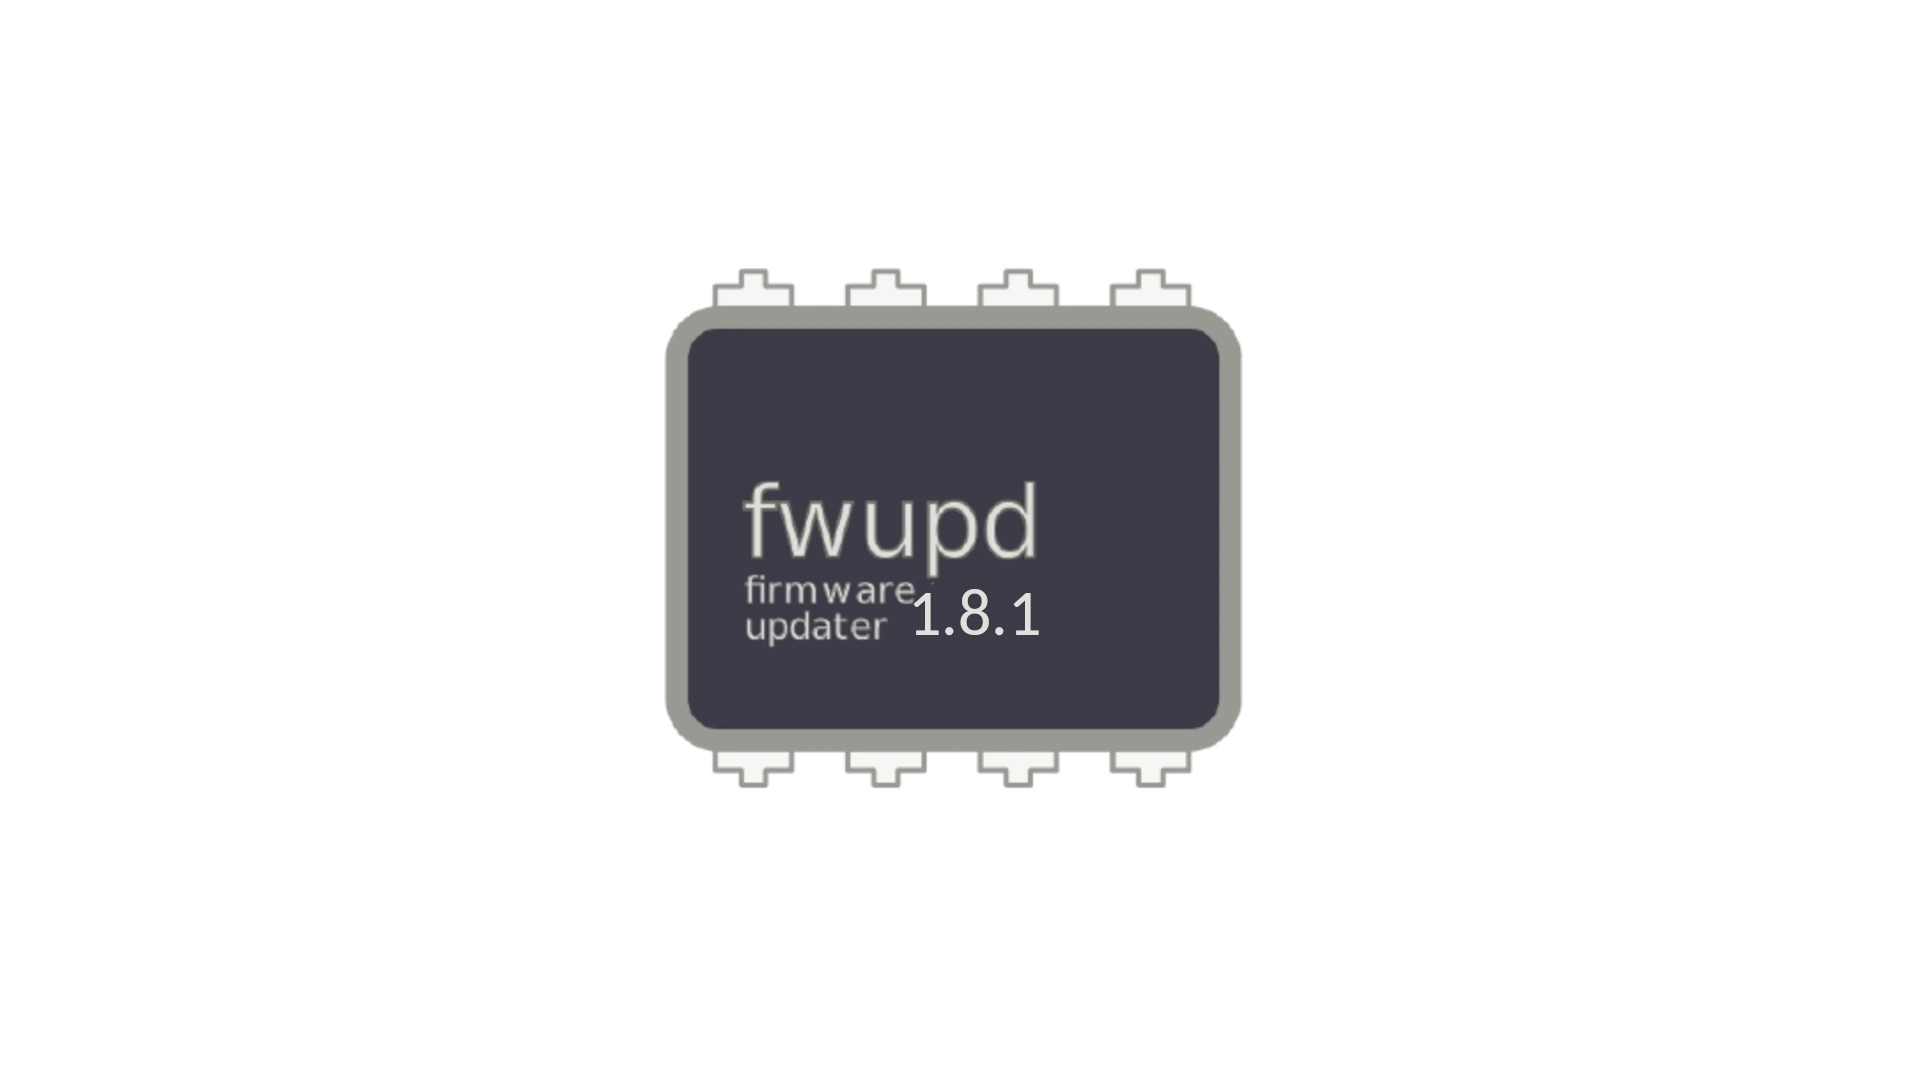 Fwupd 1.8.1 Linux Firmware Updater Brings More Hardware Support and New Features